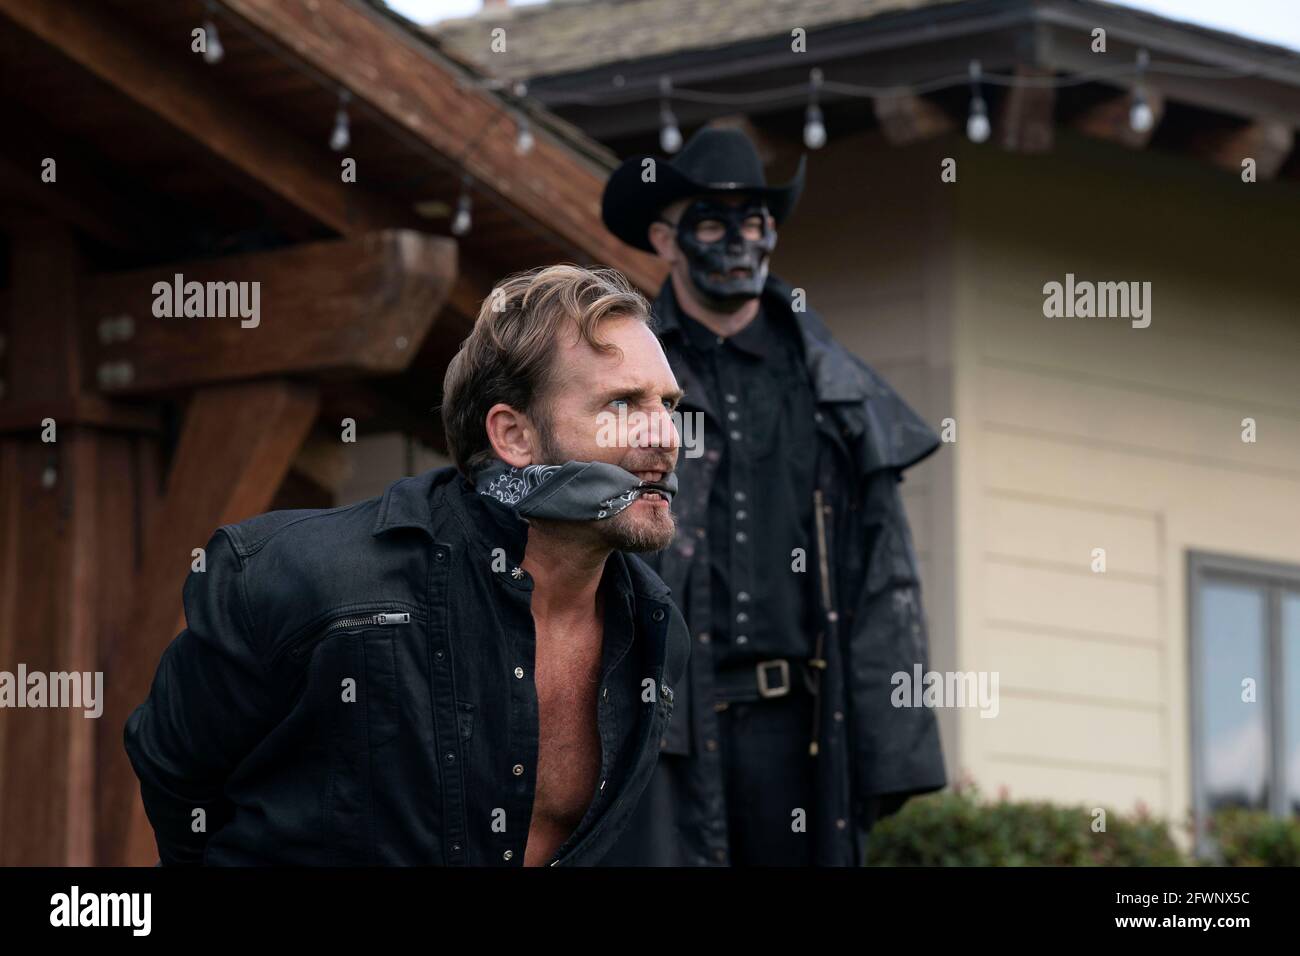 JOSH LUCAS in THE FOREVER PURGE (2021), directed by EVERARDO GOUT. Credit: UNIVERSAL PICTURES / Album Stock Photo